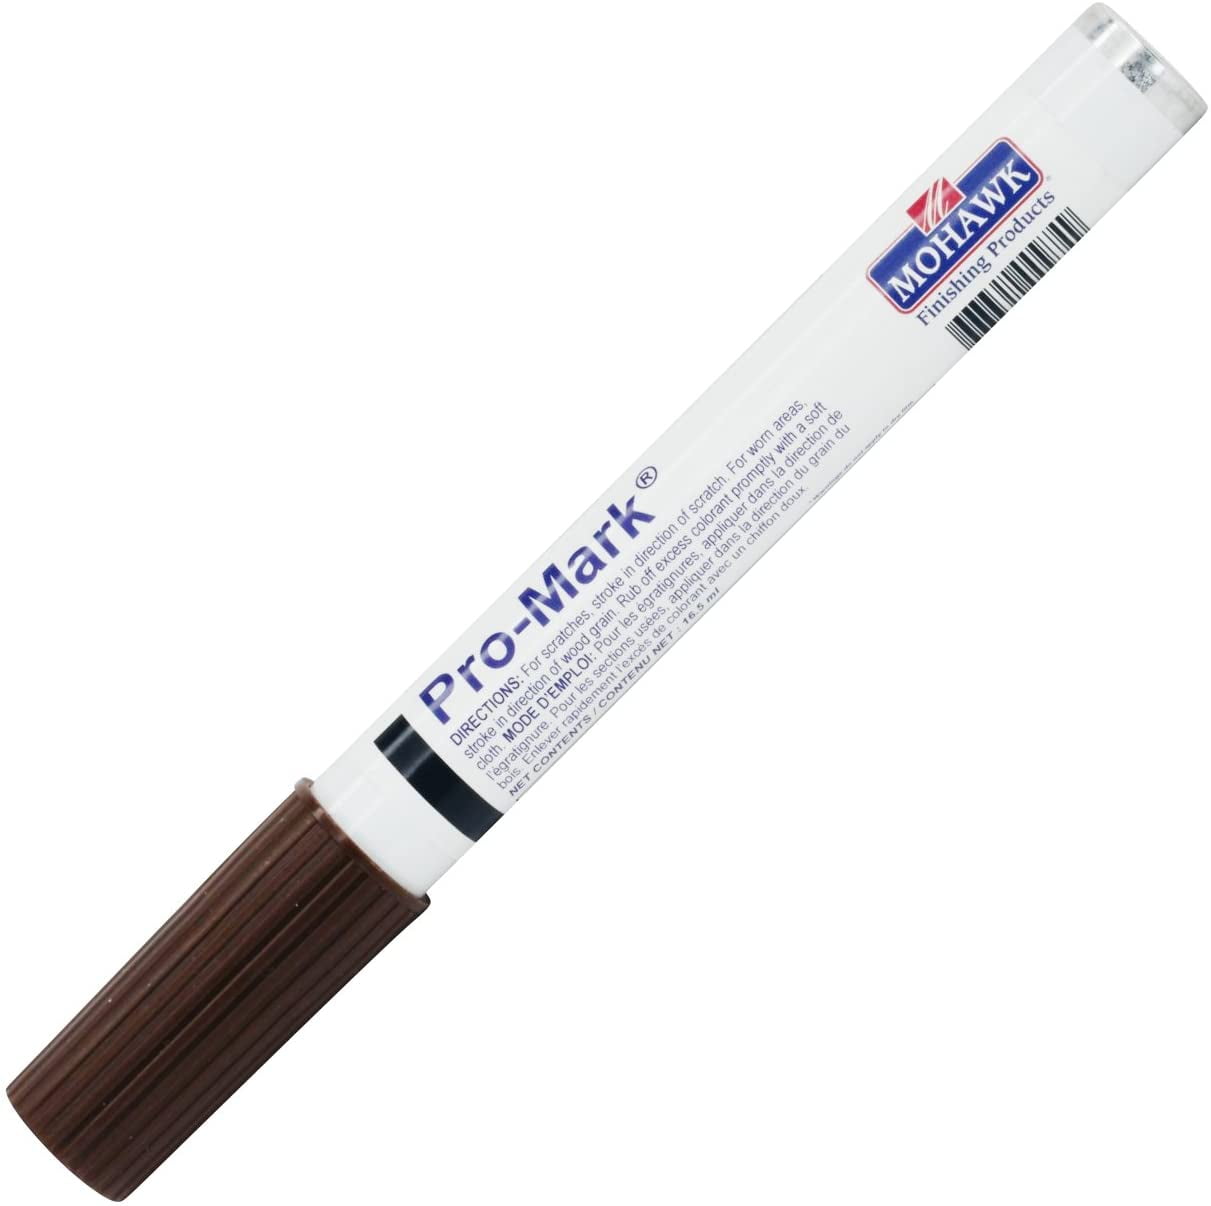 Allary Furniture Touch-Up Markers: Brown Color; 1 Pack of 3 Markers